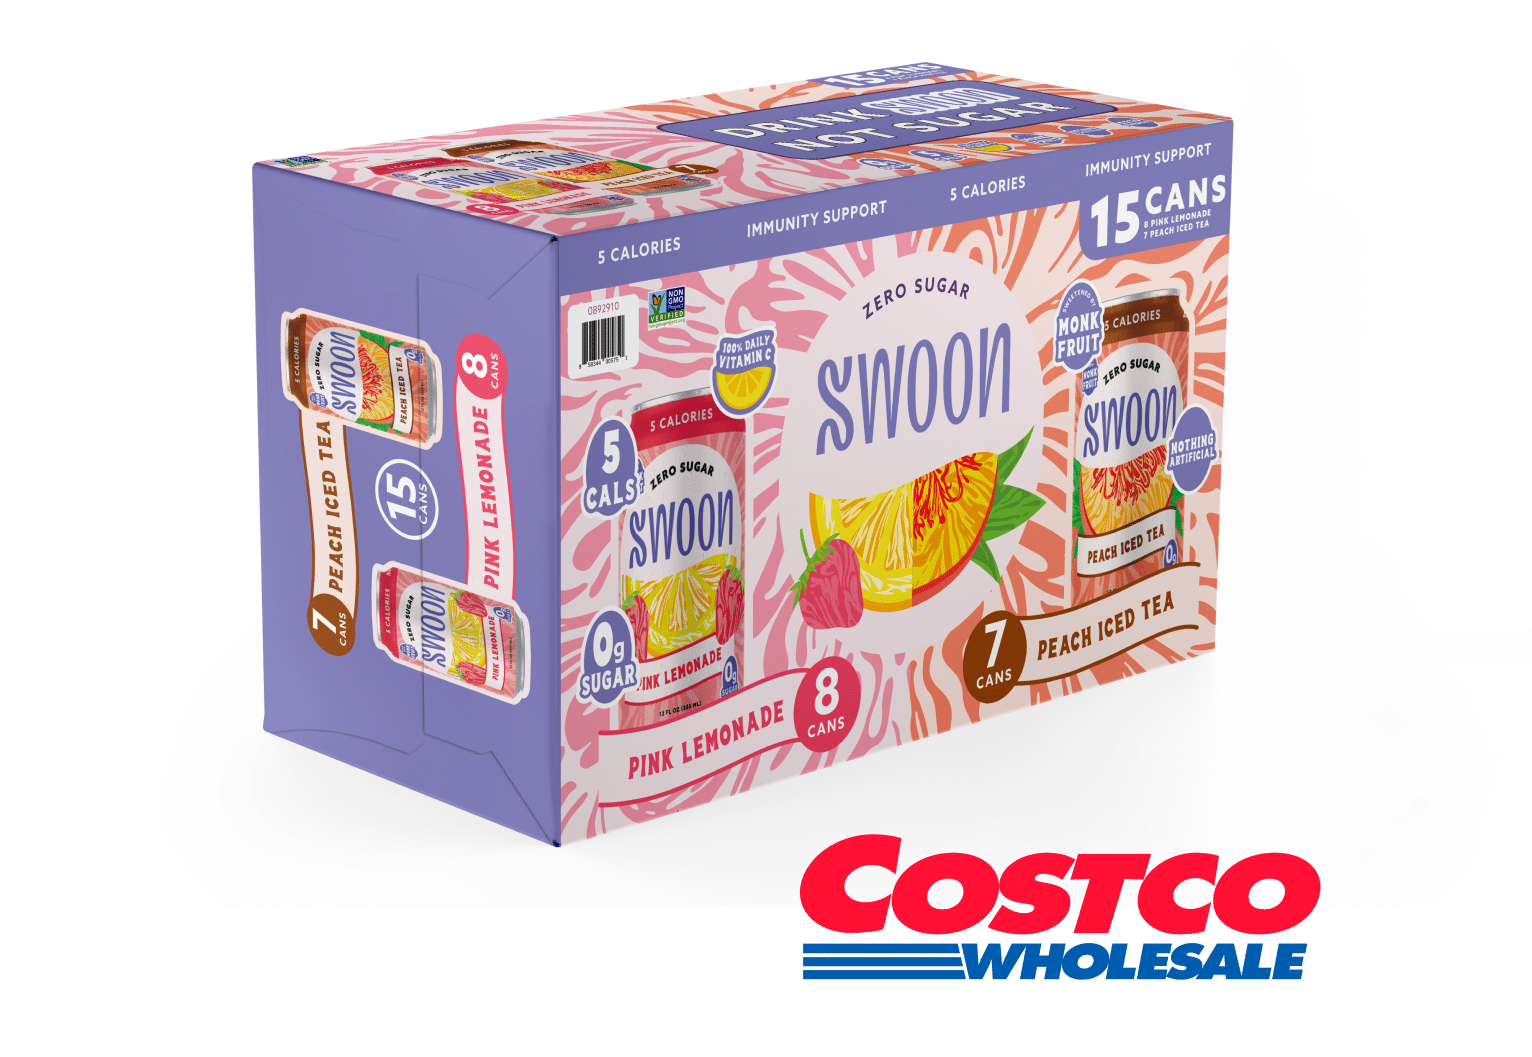 Free Swoon Beverages at Costco